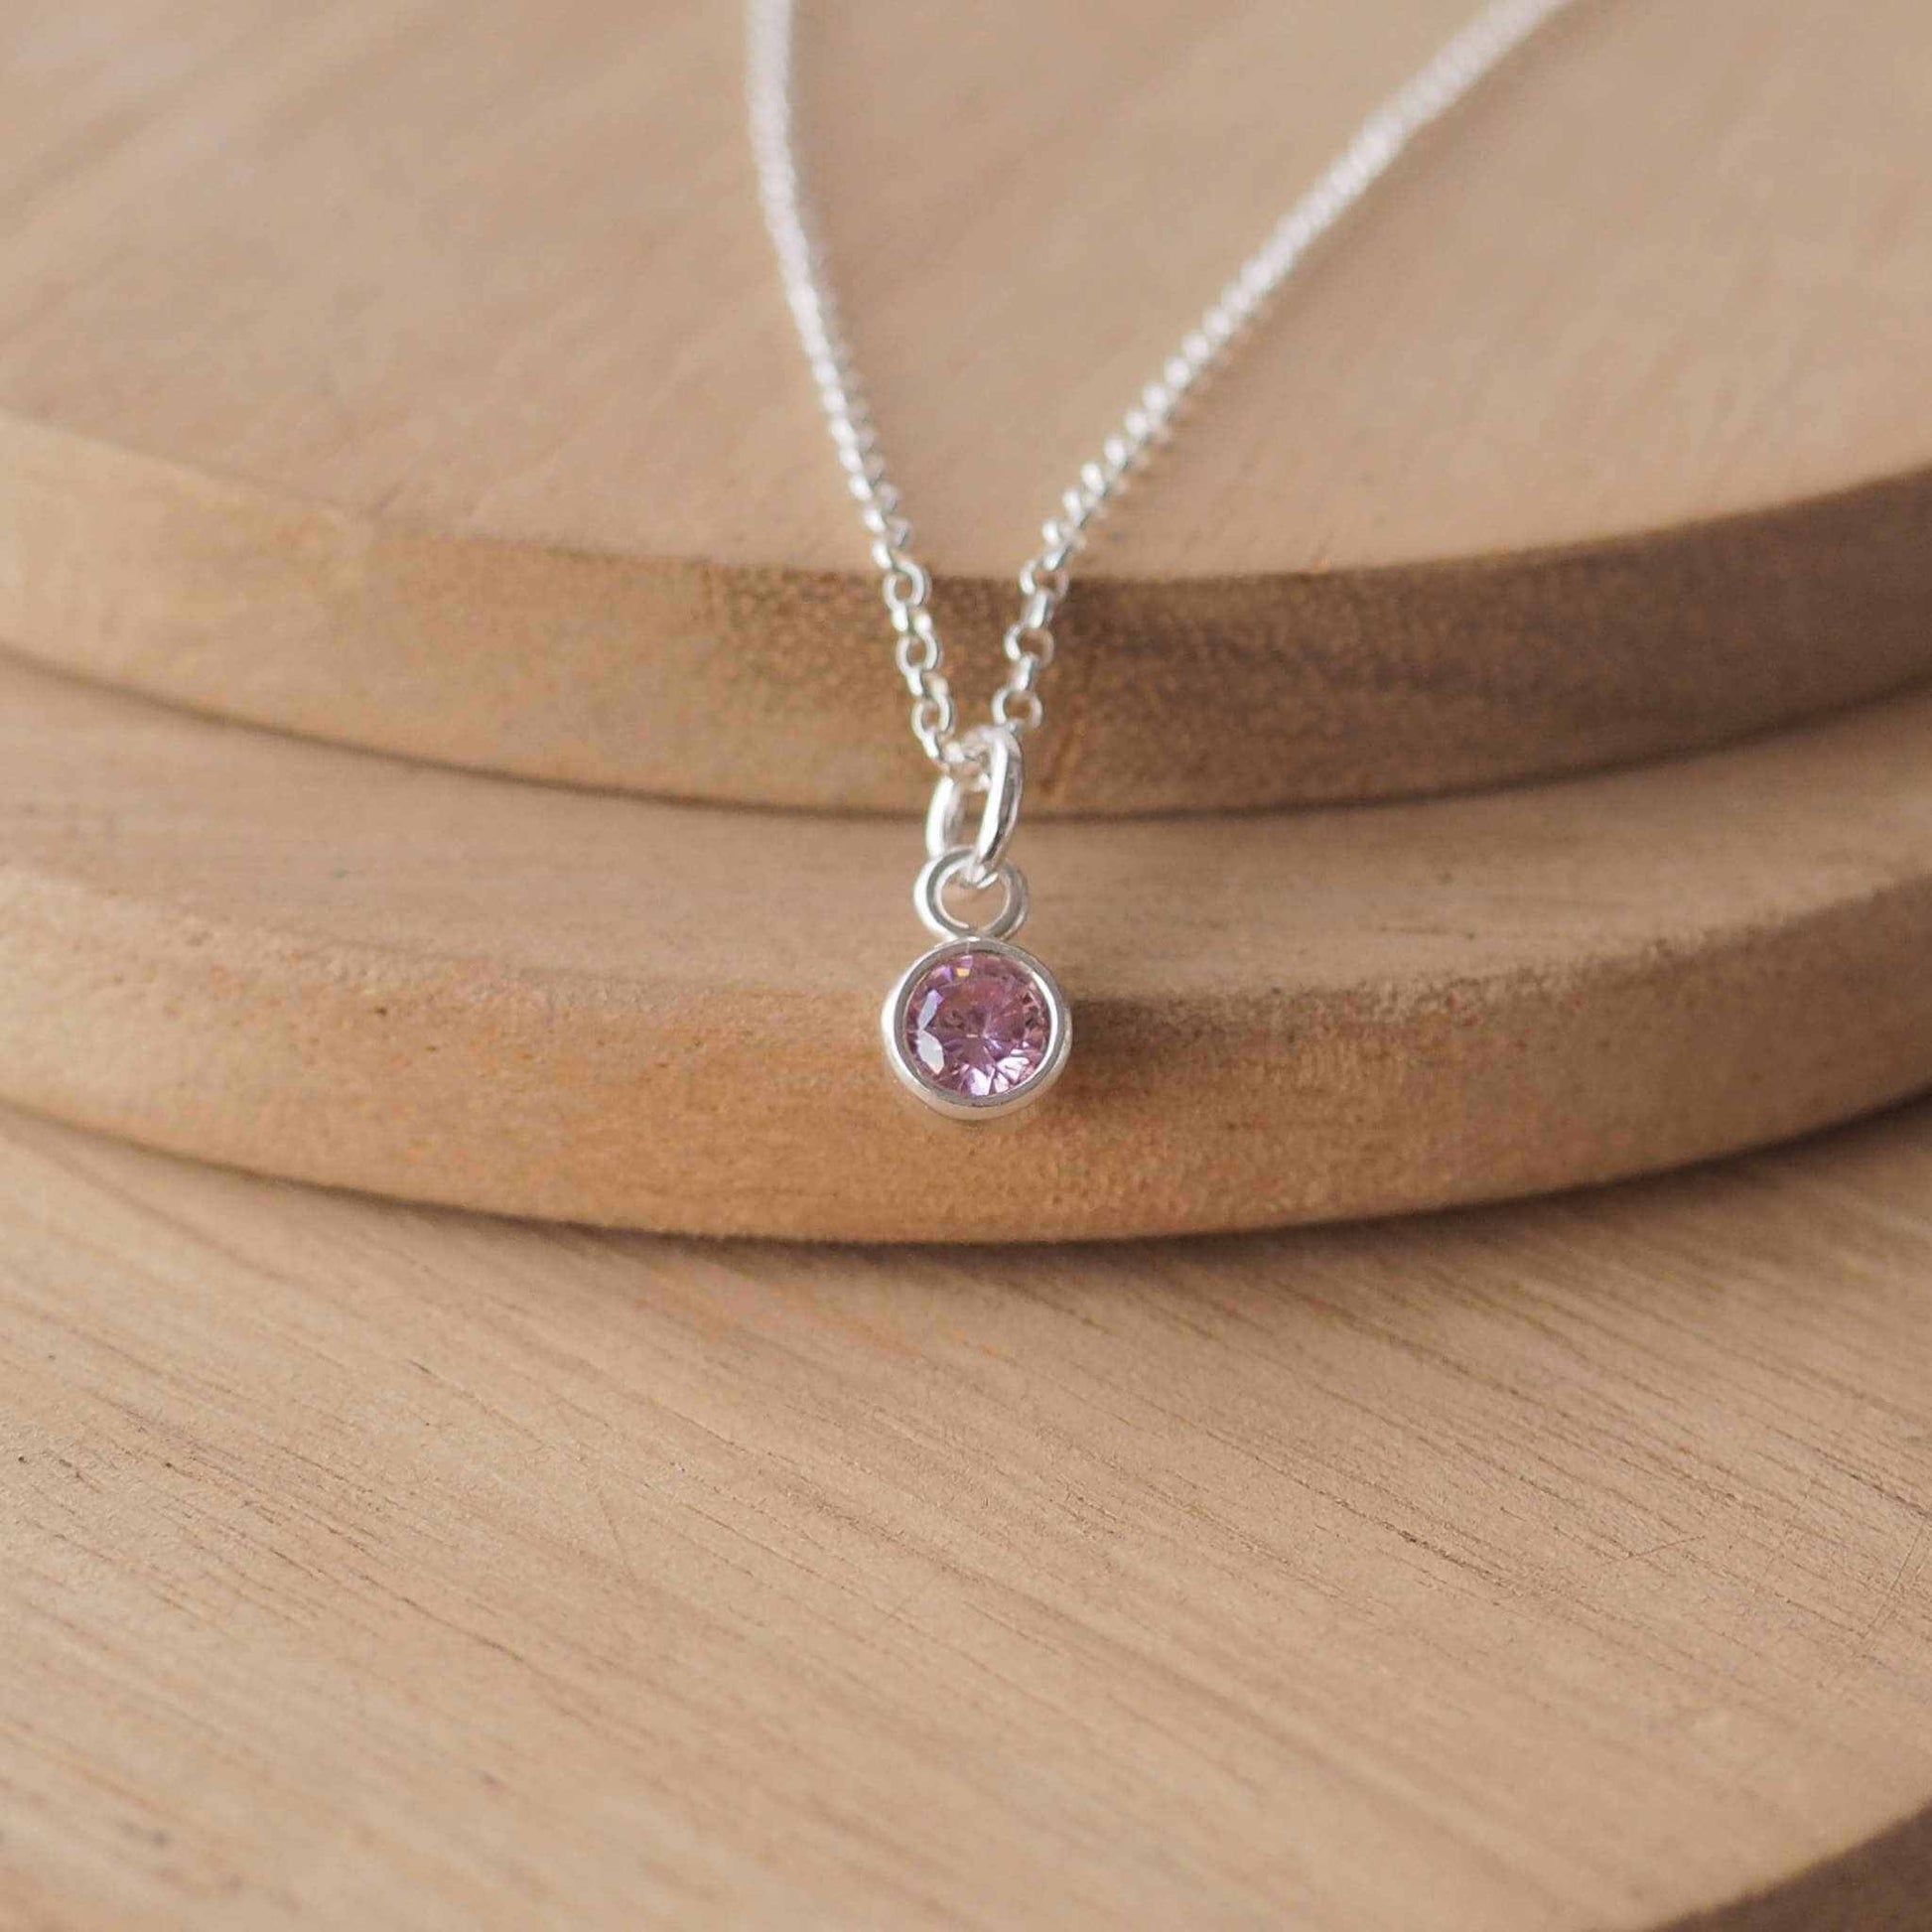 Small Sterling Silver and Cubic Zirconia Pink necklace. A small 4mm facet round pale pink gemstone with a simple silver setting on a trace style chain, suitable as a June Birthstone charm . Handmade in Scotland by Maram Jewellery